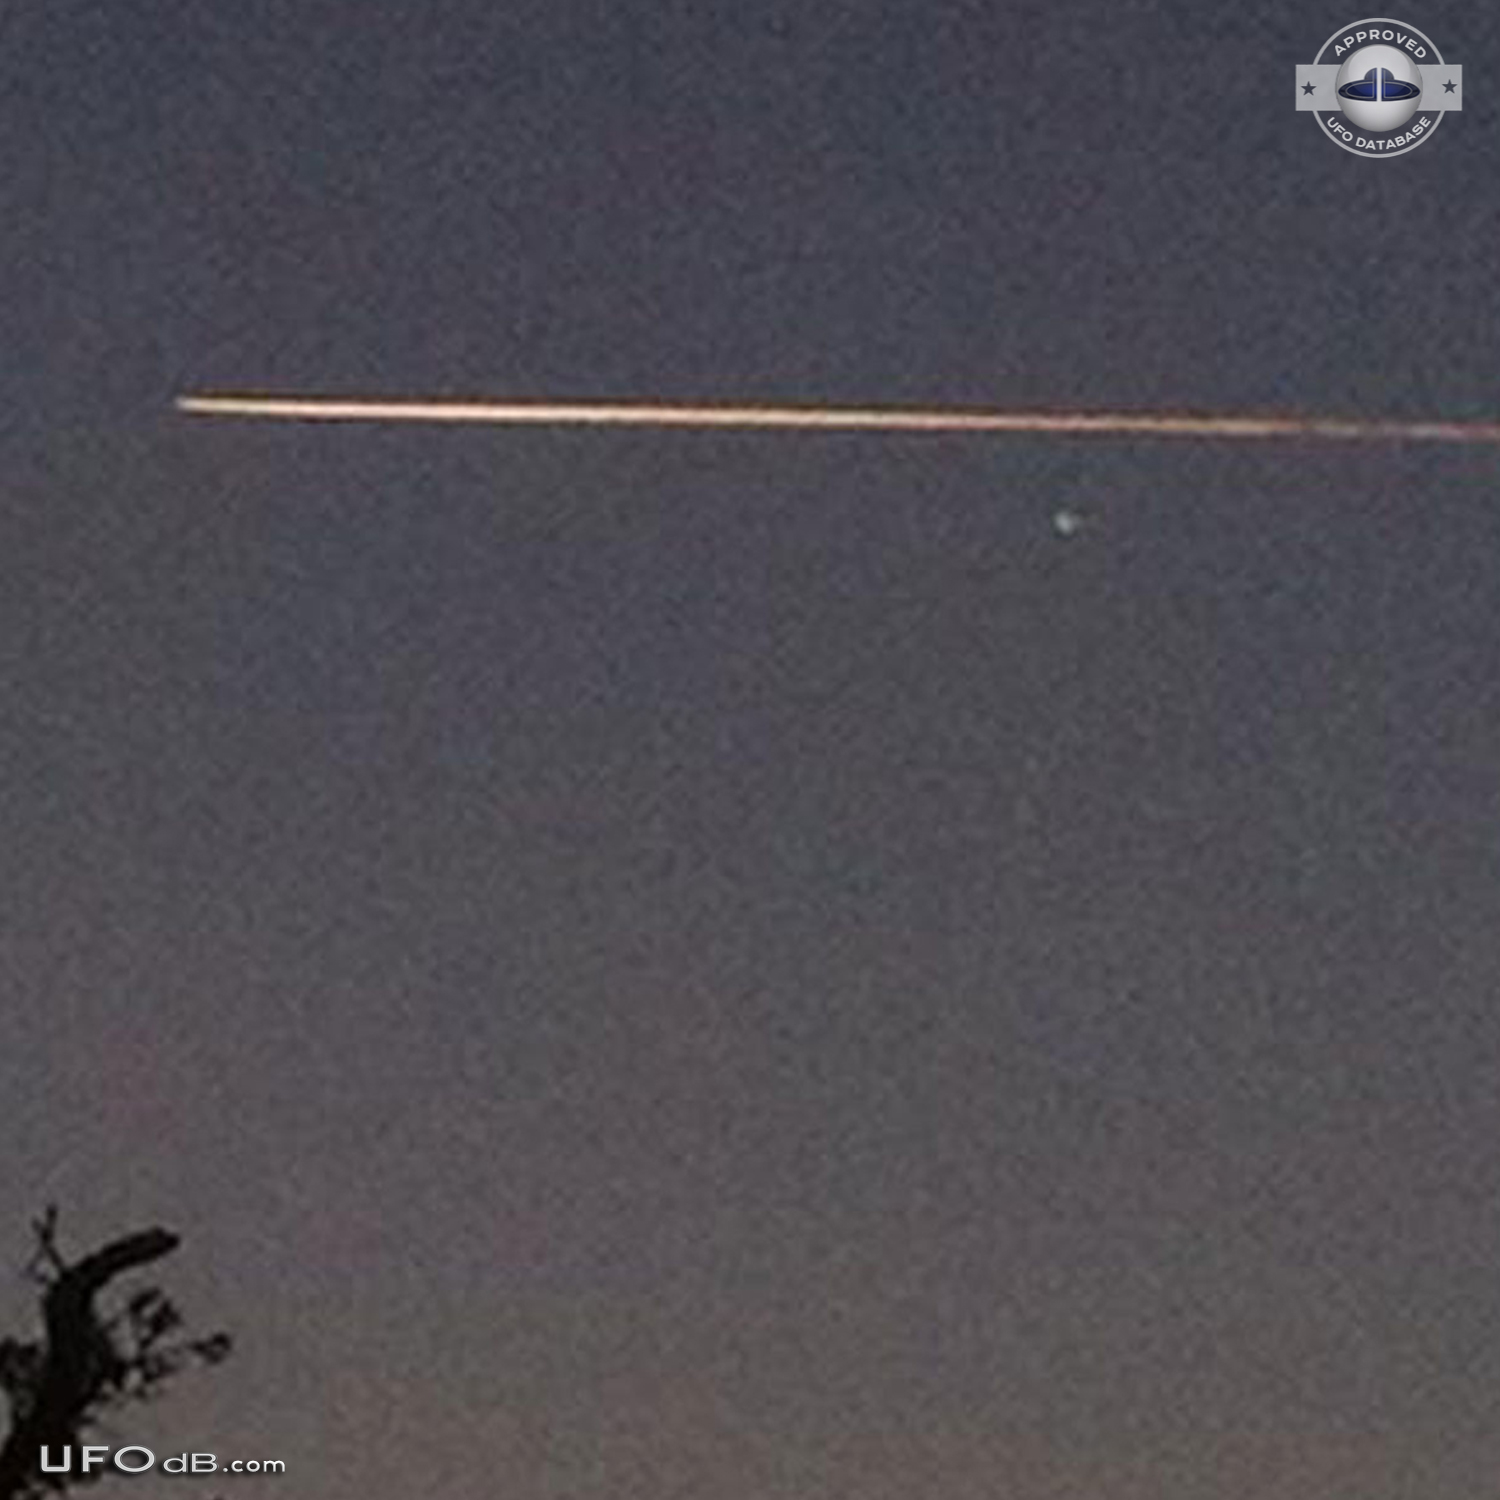 Photos of vaportrail in sunrise get UFO near plane in Evant Texas 2012 UFO Picture #519-2